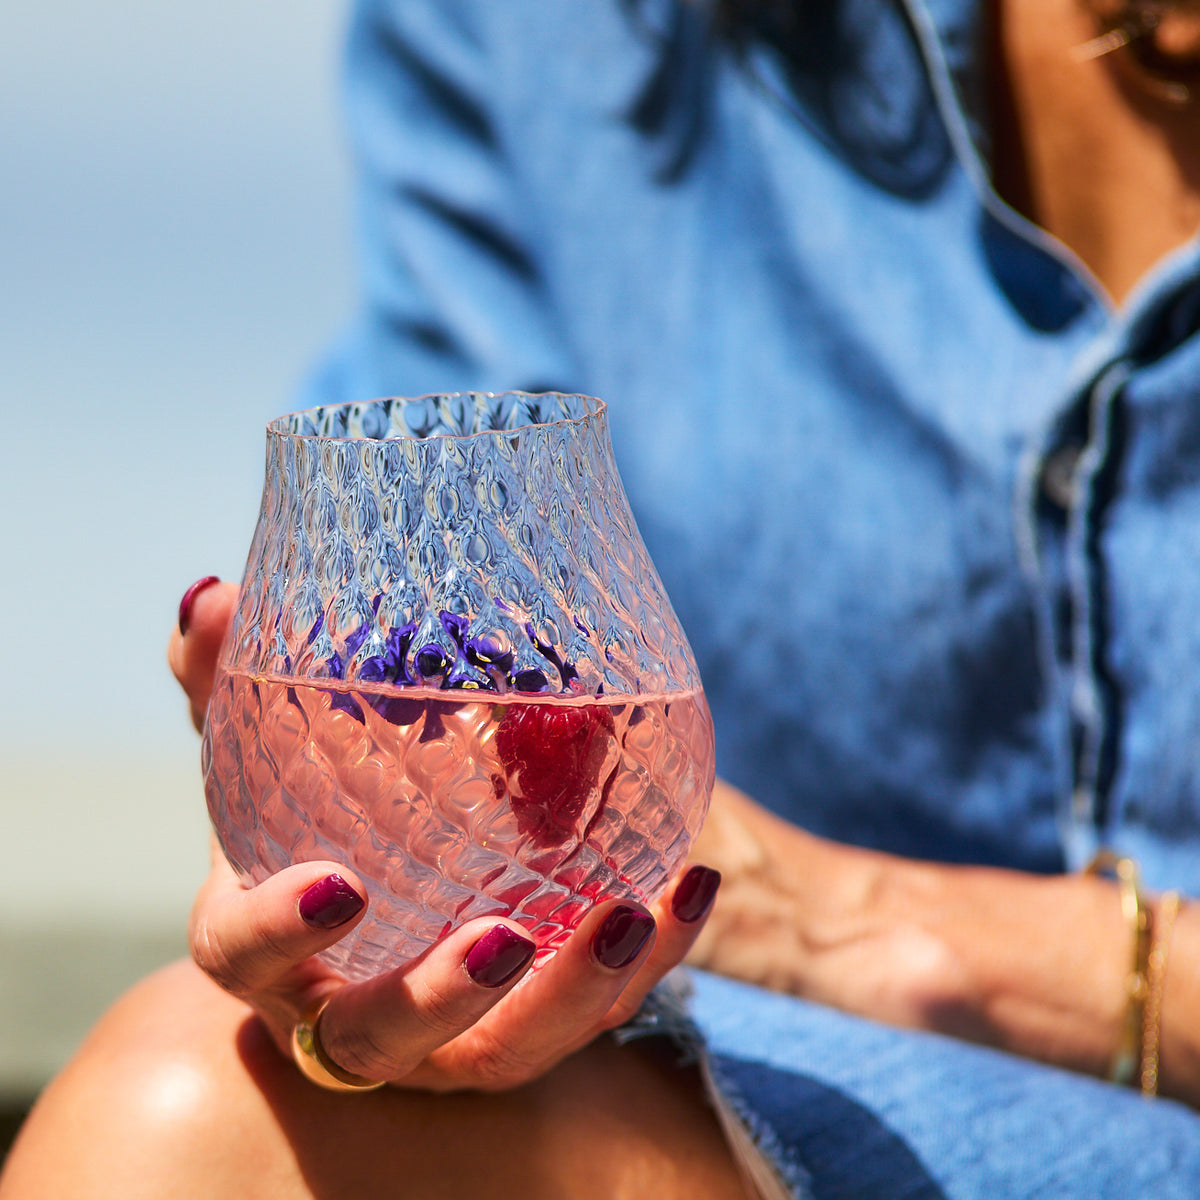 A person wearing a denim shirt holds a Caskata Phoebe Clear Stemless Wine Glasses containing a pink beverage with flower petals.